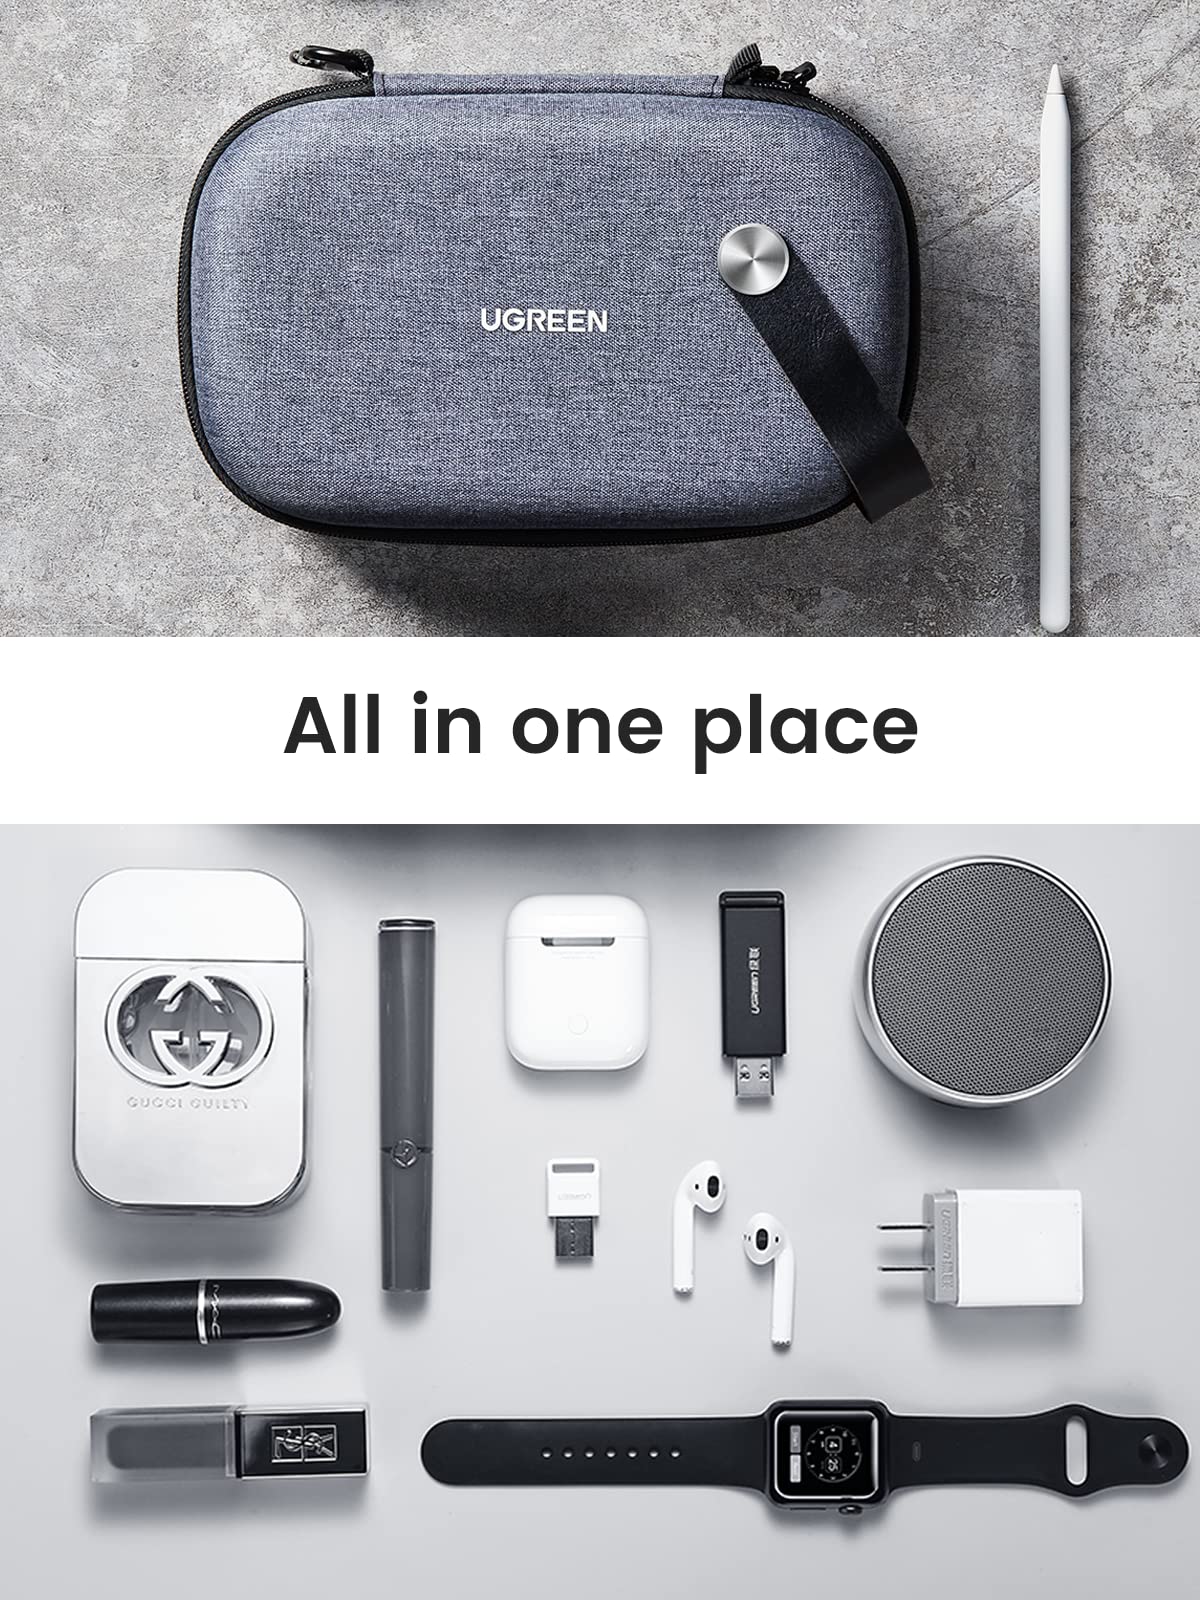 UGREEN Travel Case Universal Electronic Accessories Bag Cable Organizer Portable Carrying Pouch for Mini Speaker, USB Cable, Memory Cards, Power Bank, Hard Drive, Charger, Cosmetics, and More, Grey